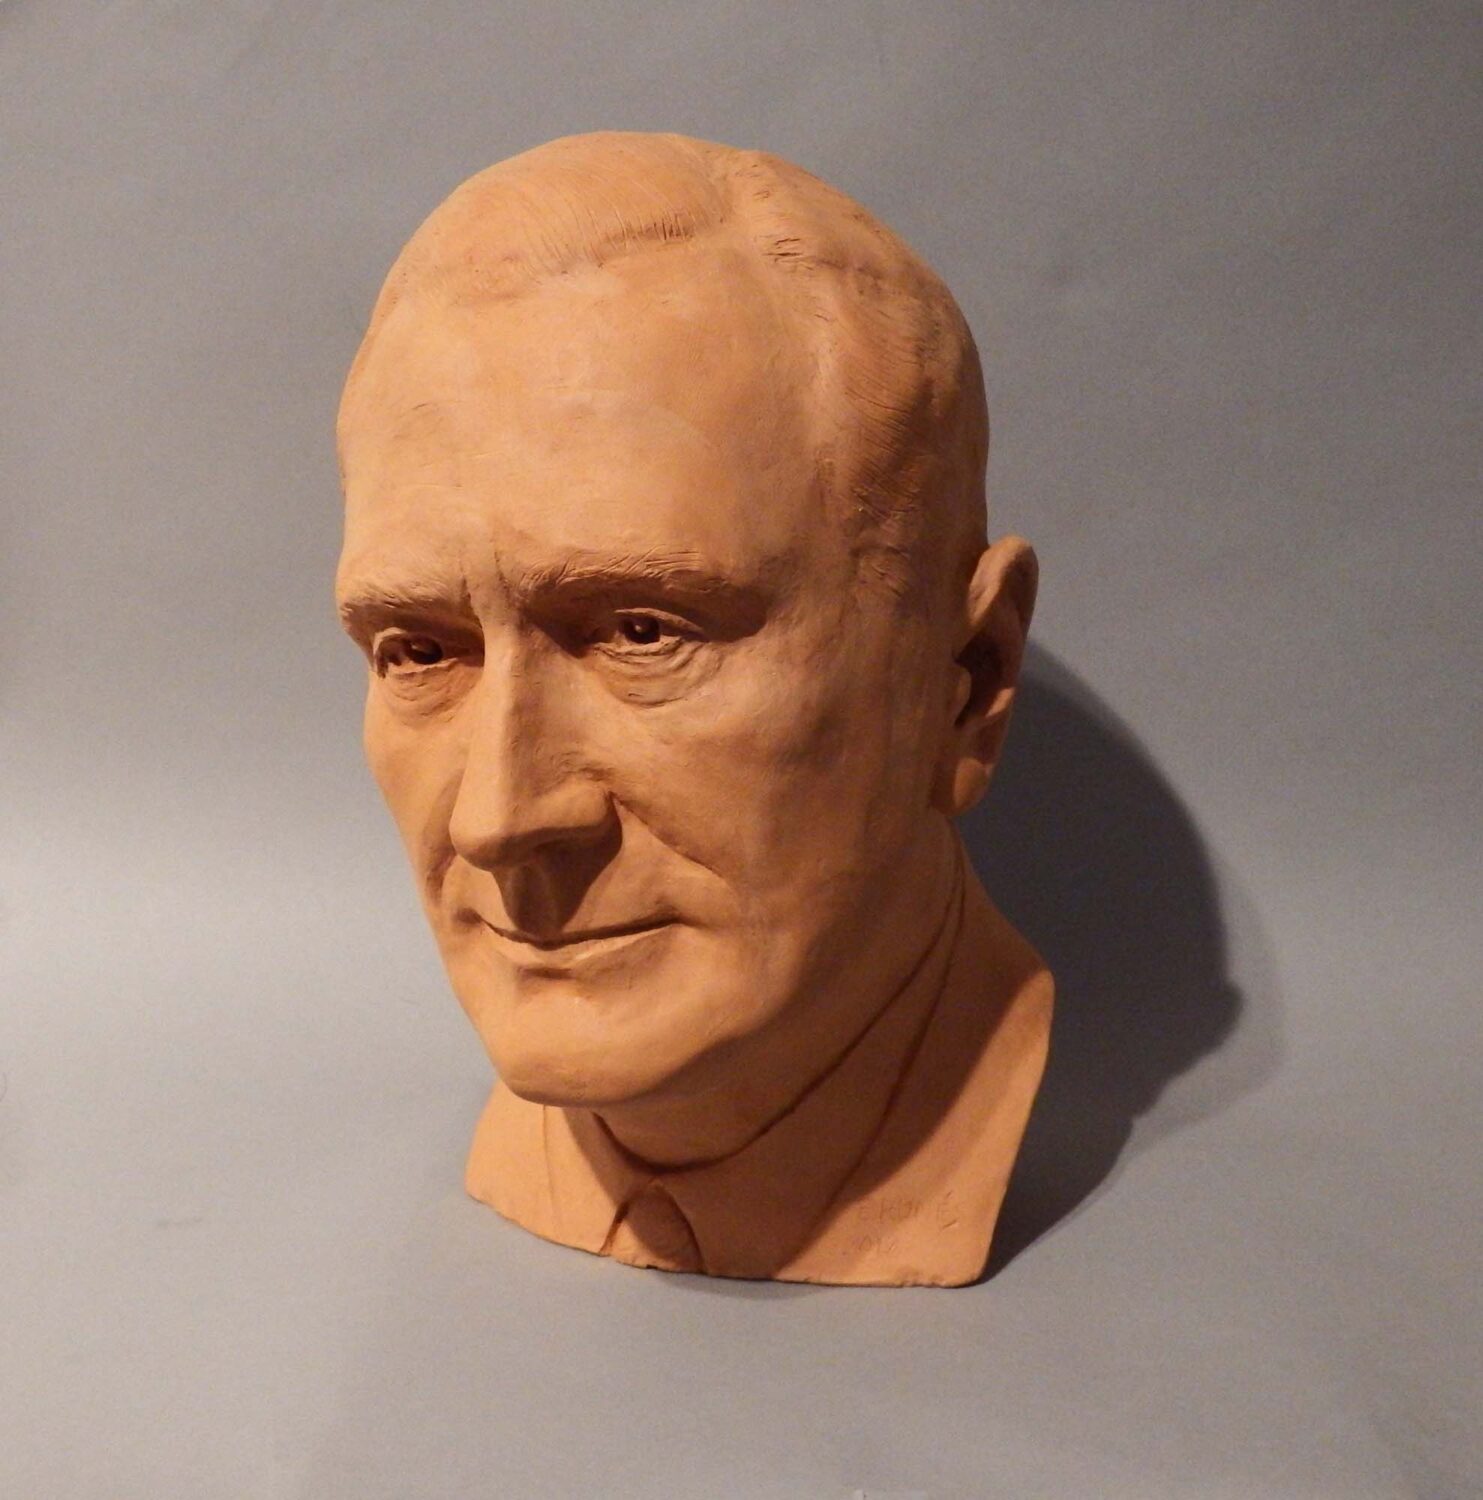 thumbnail of Sculpture of Franklin D. Roosevelt made out of Terra cotta